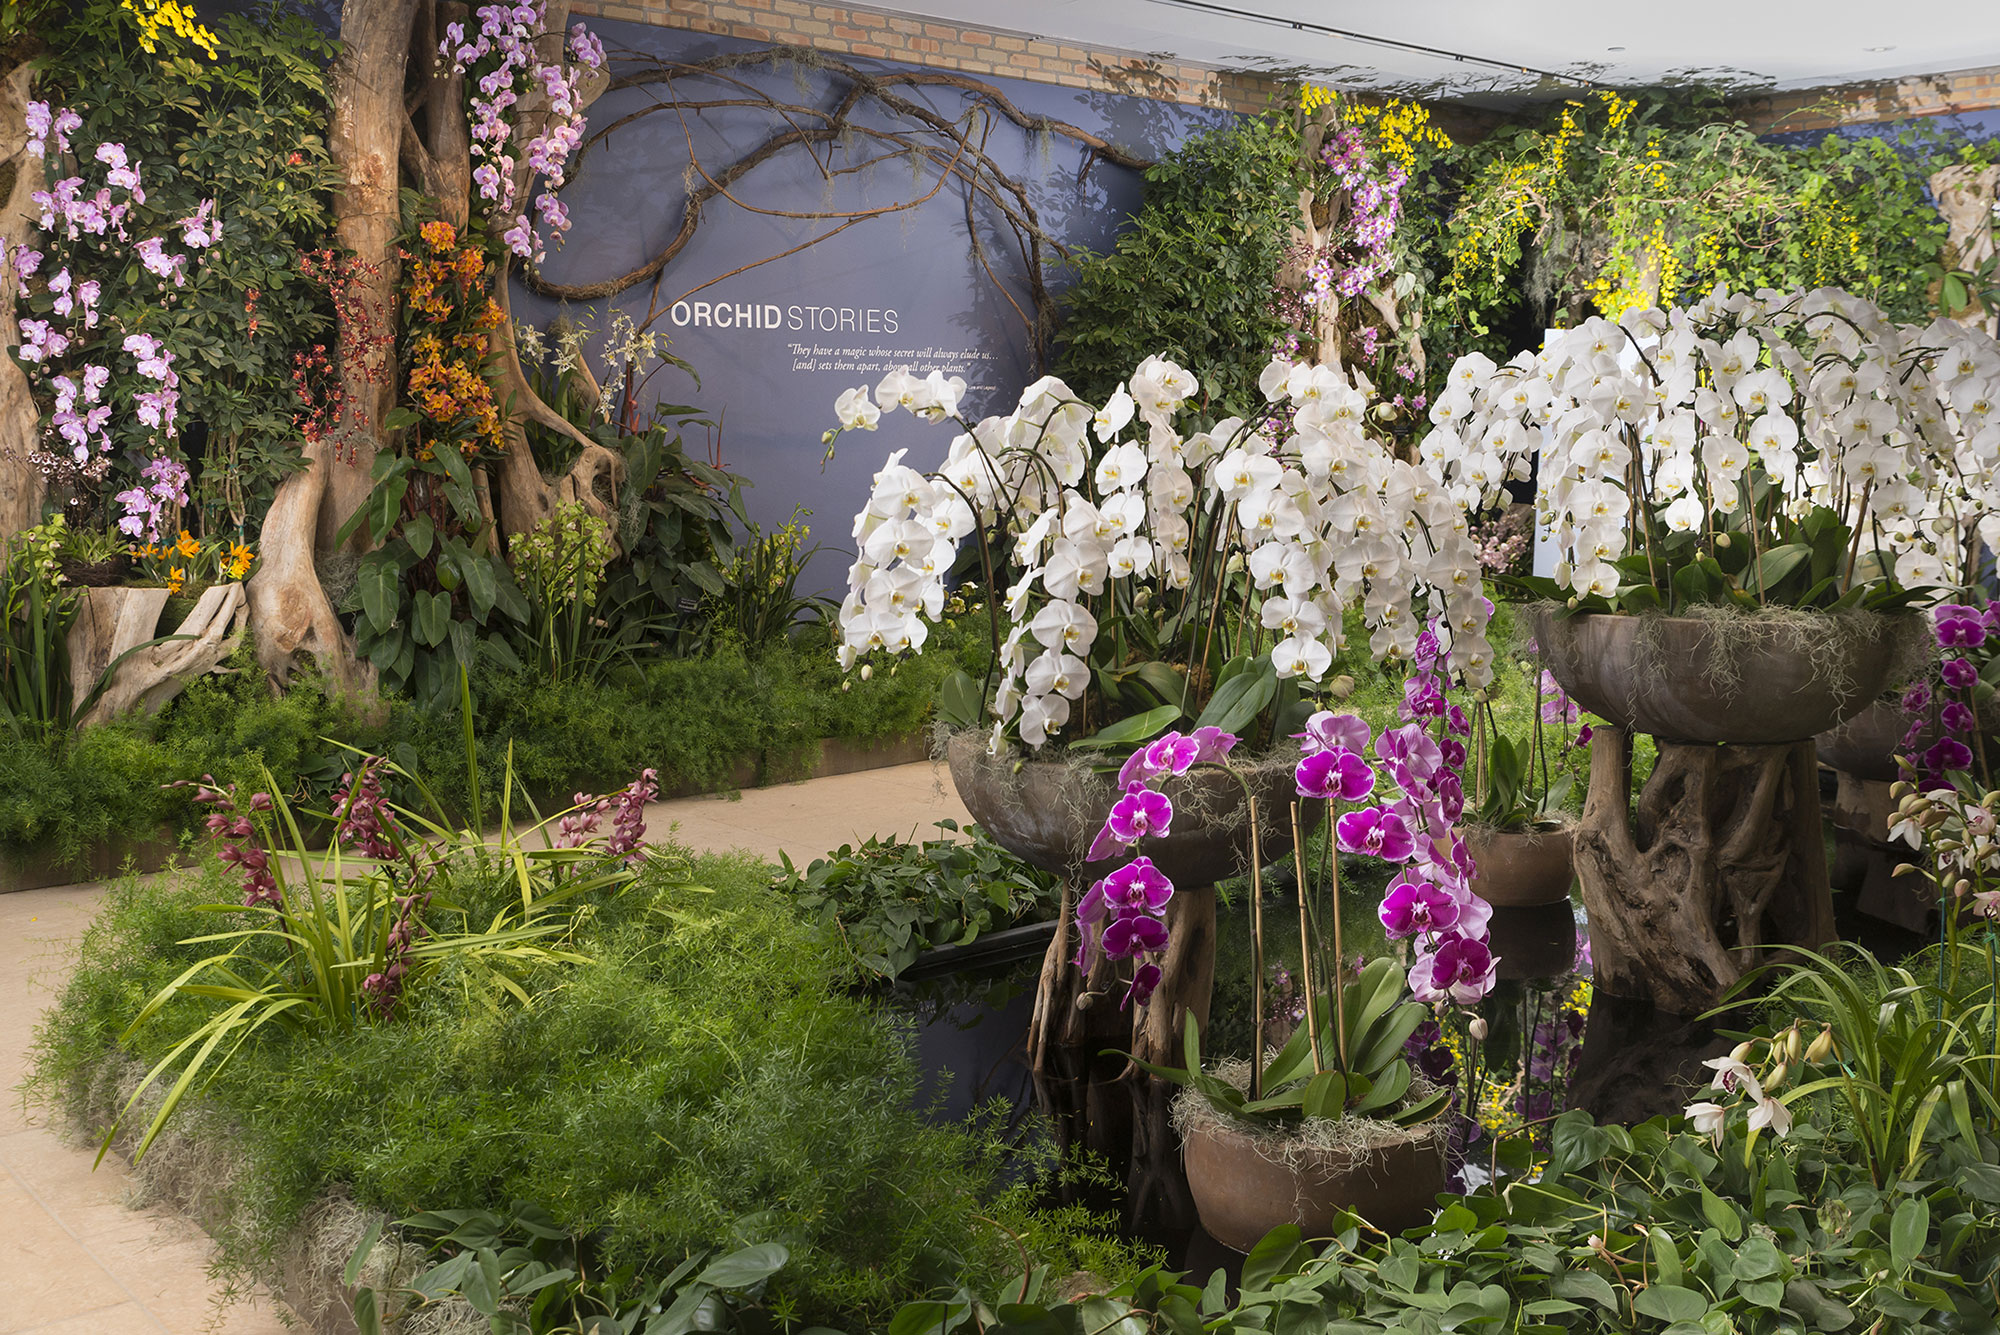 Untamed: The Orchid Show at the Chicago Botanic Garden